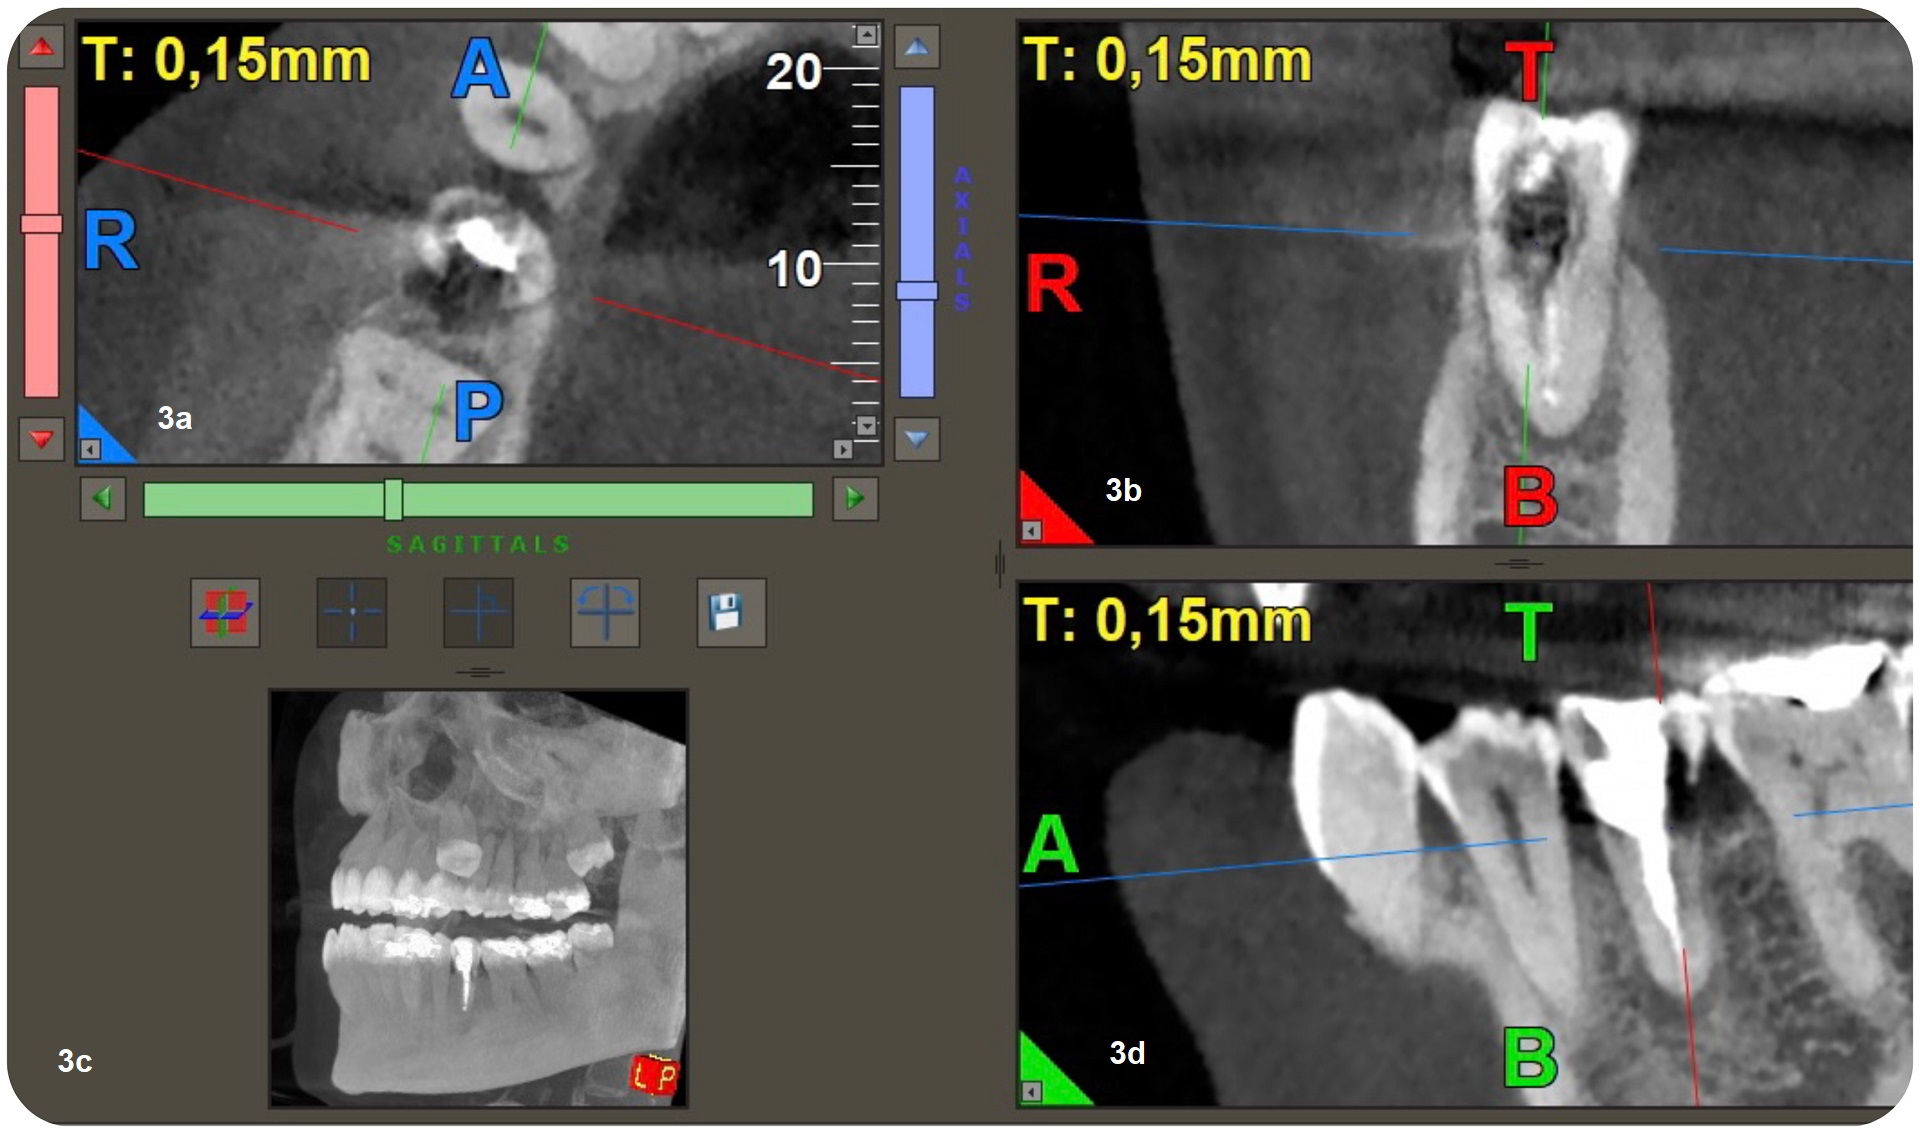 Figs. 3a–d: 3D reconstruction of axial section showing extension in mesial-distal direction (a). 3D reconstruction of a sagittal section showing the lesion extension, buccal-palatal direction (b). Coronal section of CBCT showing the extension of the periapical lesion and the resorptive defect (c). CBCT scan (d).